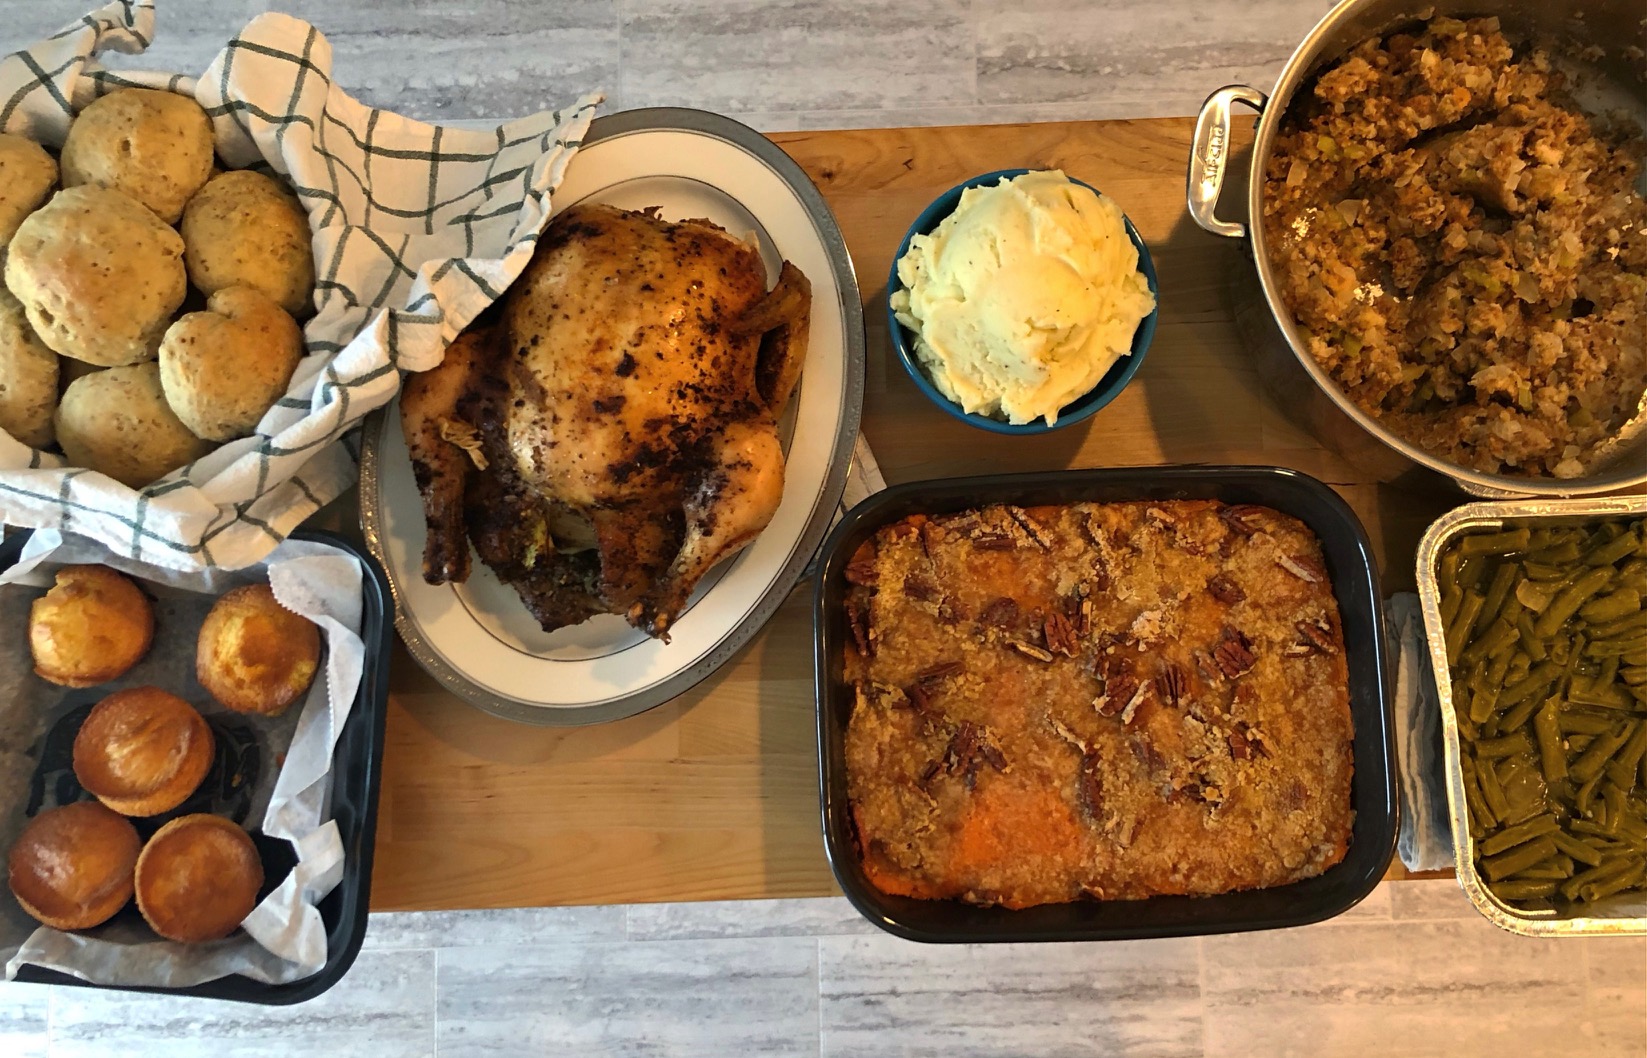 An overhead photo shows the author's Thanksgiving spread: two baskets of rolls, a whole chicken, a bowl of mashed potatoes, a tin pan of green beans, a metal pot of stuffing, and a black casserole dish with sweet potato casserole. Photo by Alyssa Buckley.